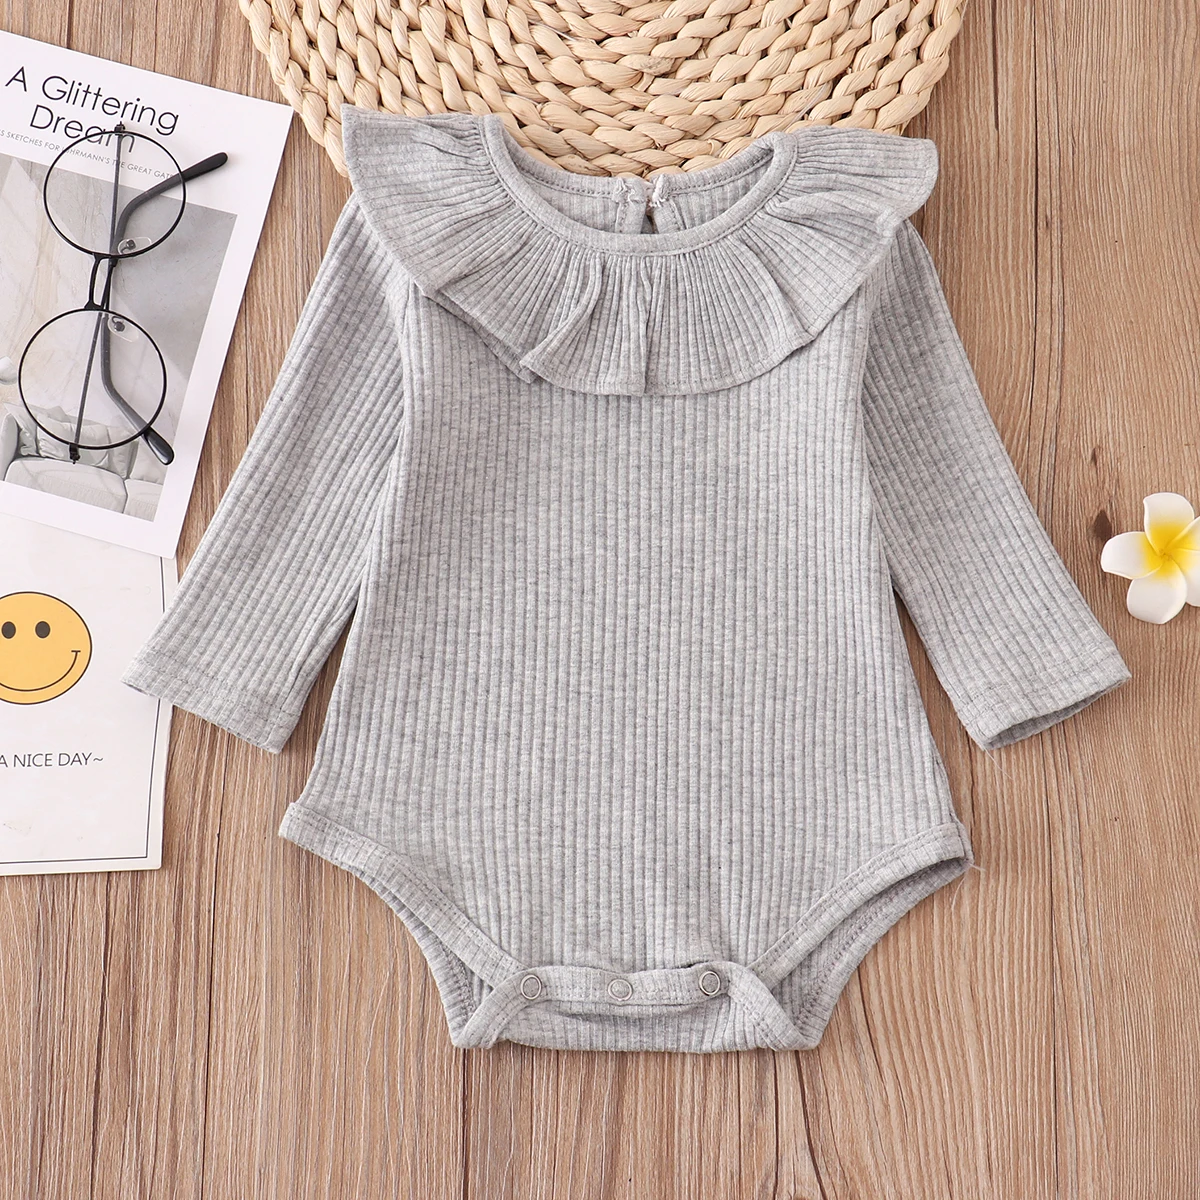 Newborn Infant Baby Rompers 0-2Y 2022 Spring Summer Candy Ruffles Jumpsuit New born Baby Girl Clothes Outfits baby knitted clothing set Baby Clothing Set